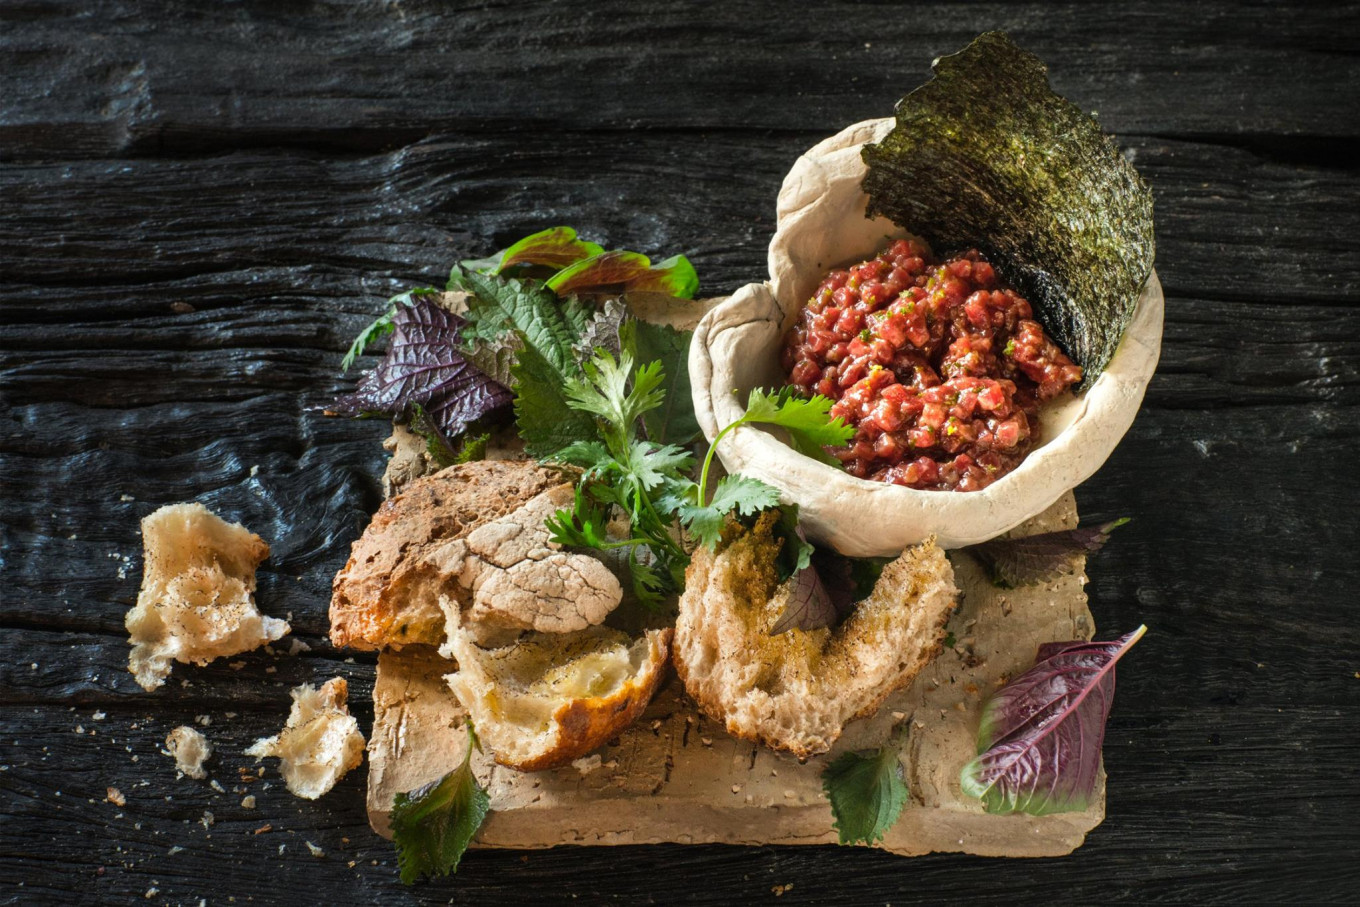 
					Sempre's beef tartare is served on a stone platter with seaweed paper and aromatic fresh greens.					 					SEMPRE / FACEBOOK				